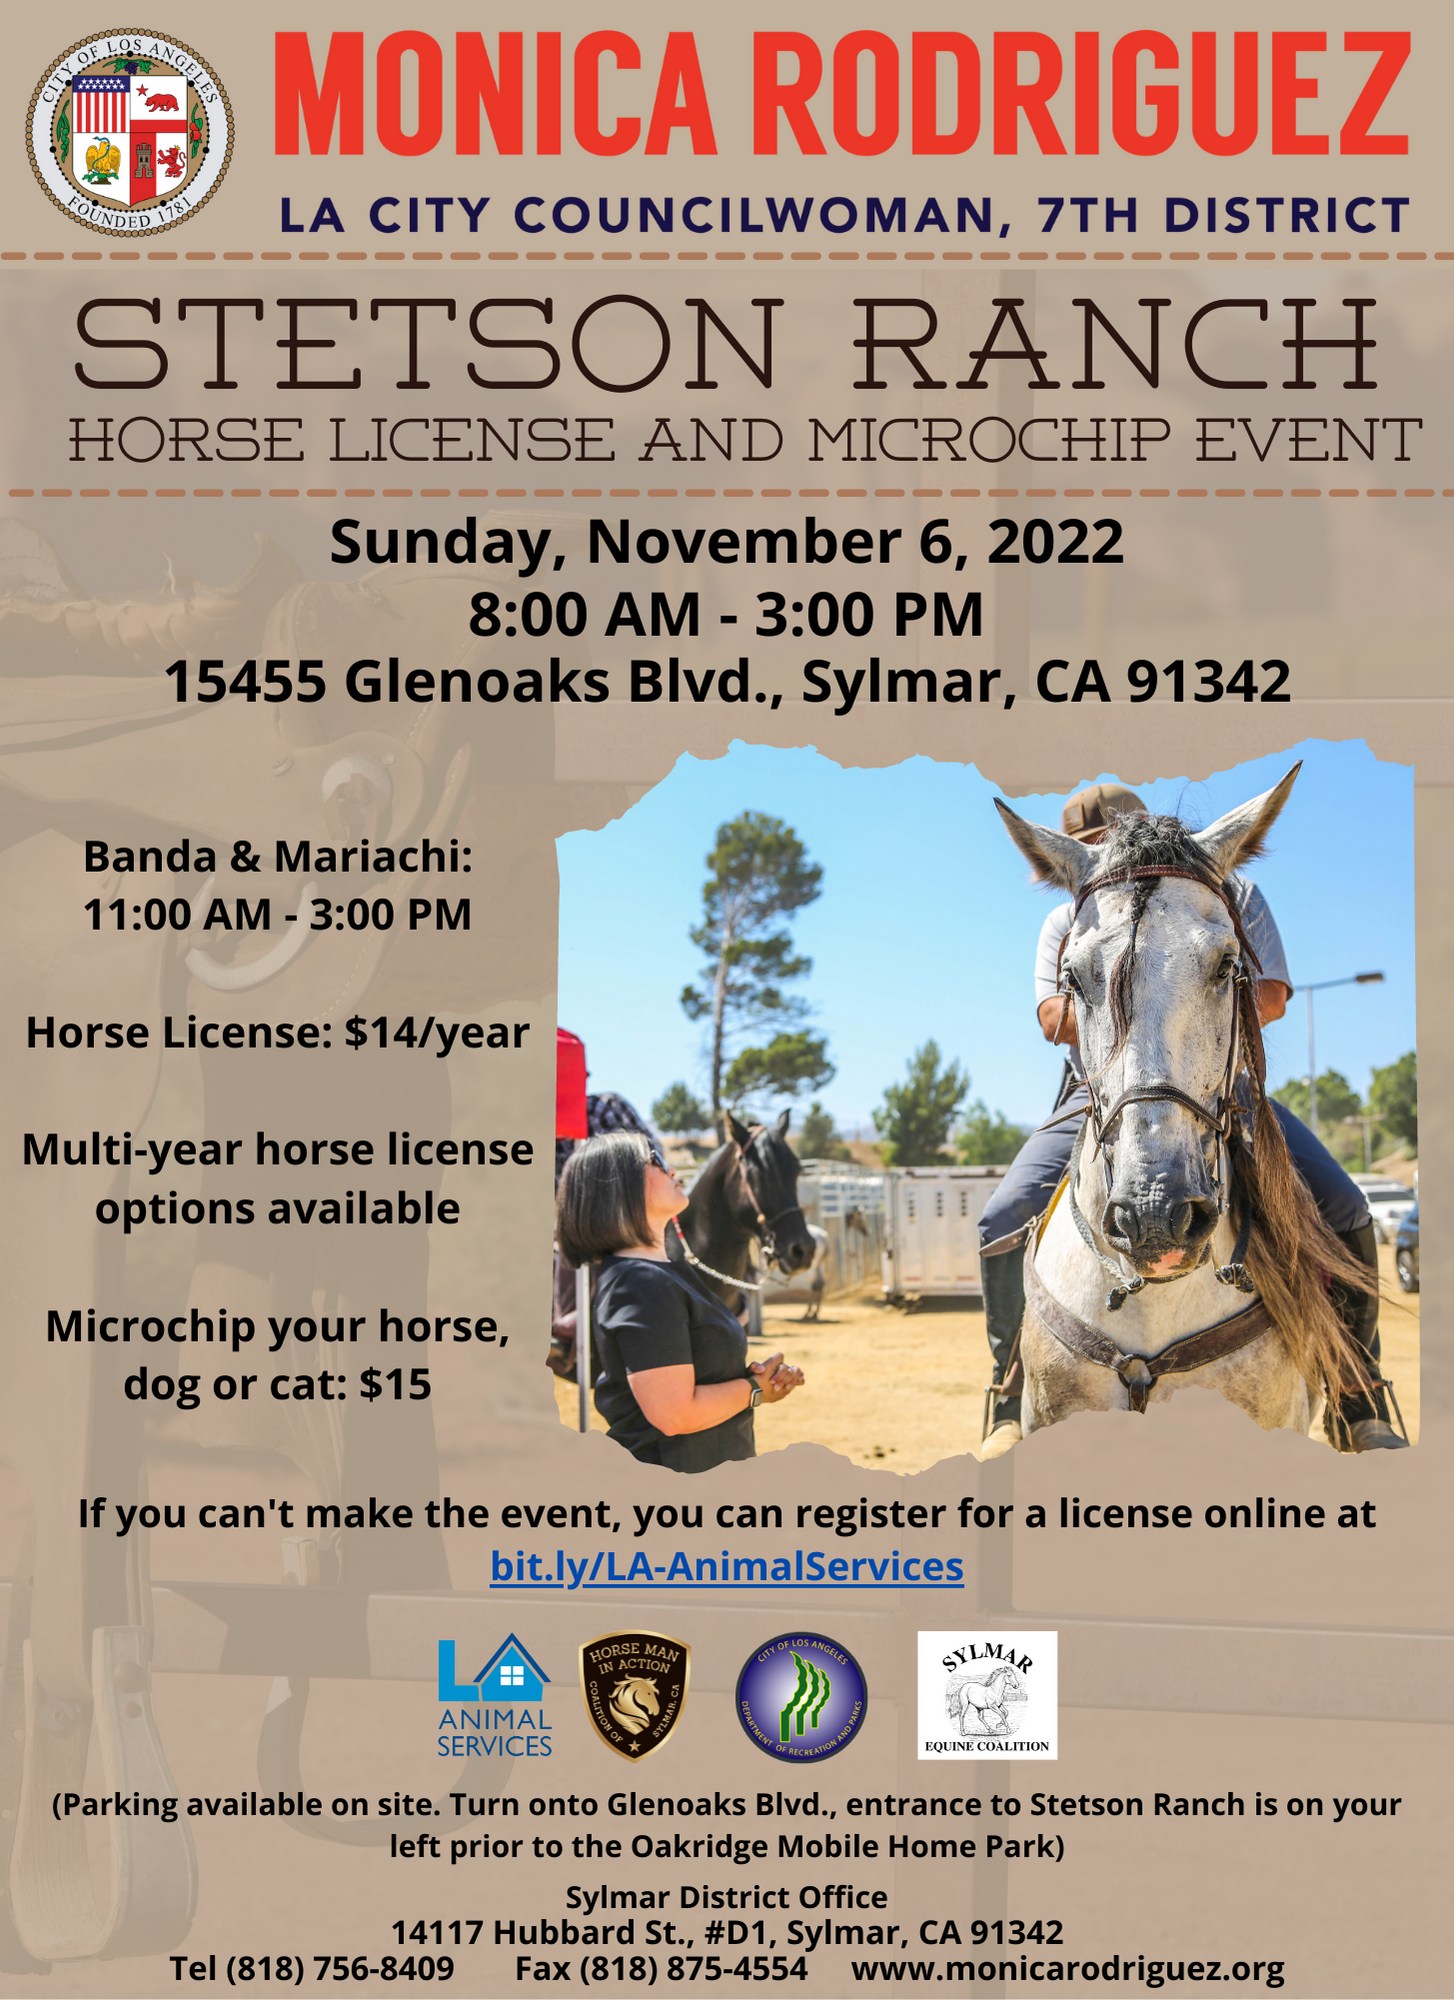 Second Annual Horse License and Microchip Event